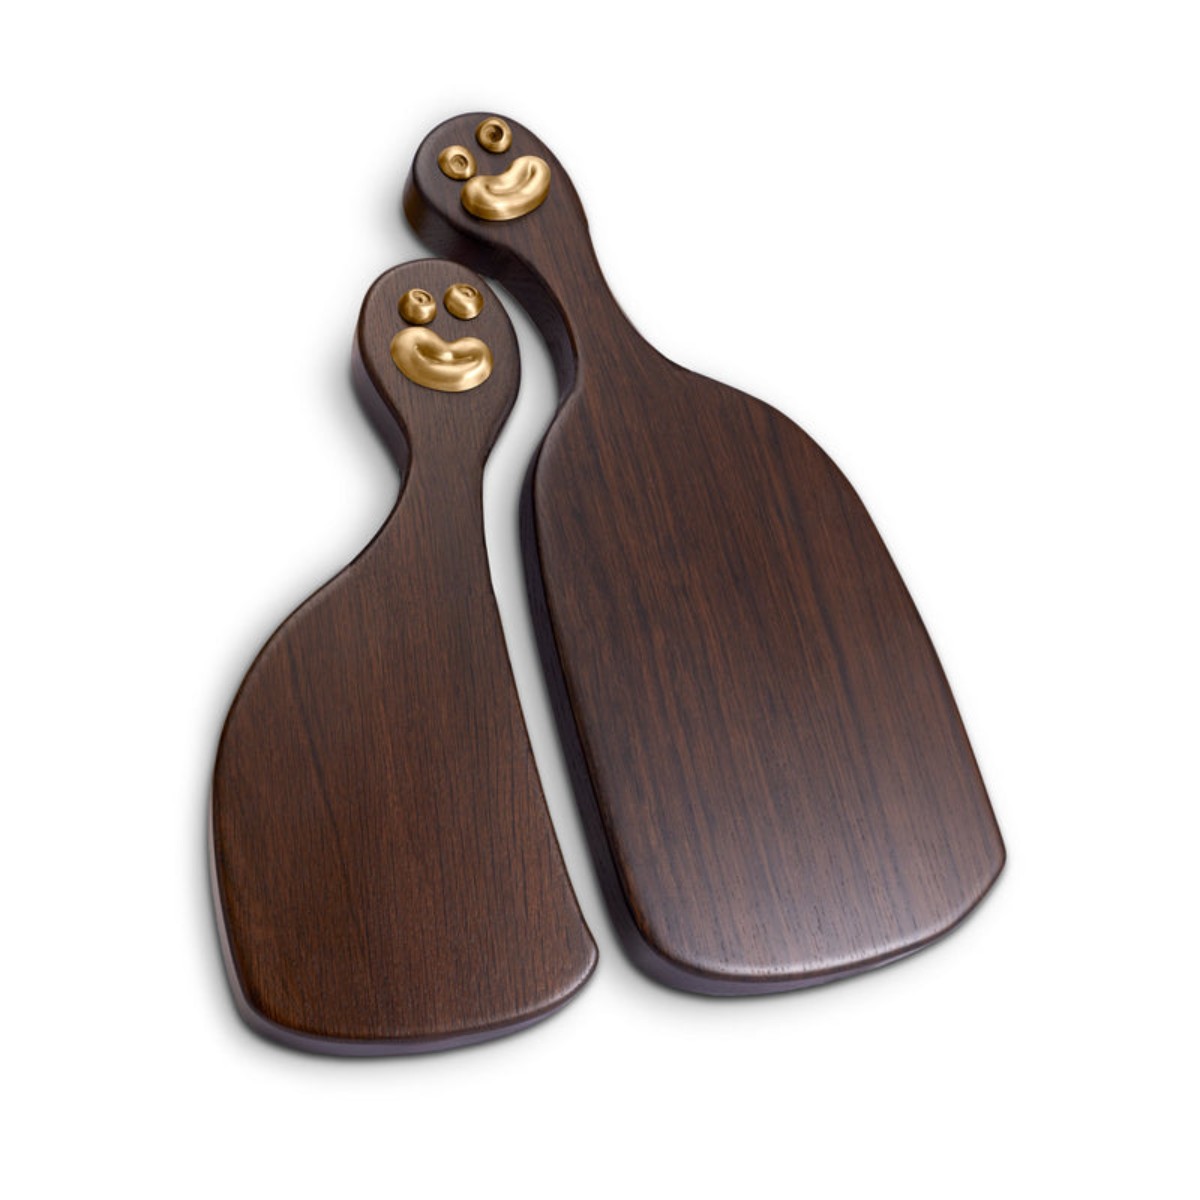 L’Objet | HAAS Brothers | Haas Louise Nested Cheese Boards (Set of 2)